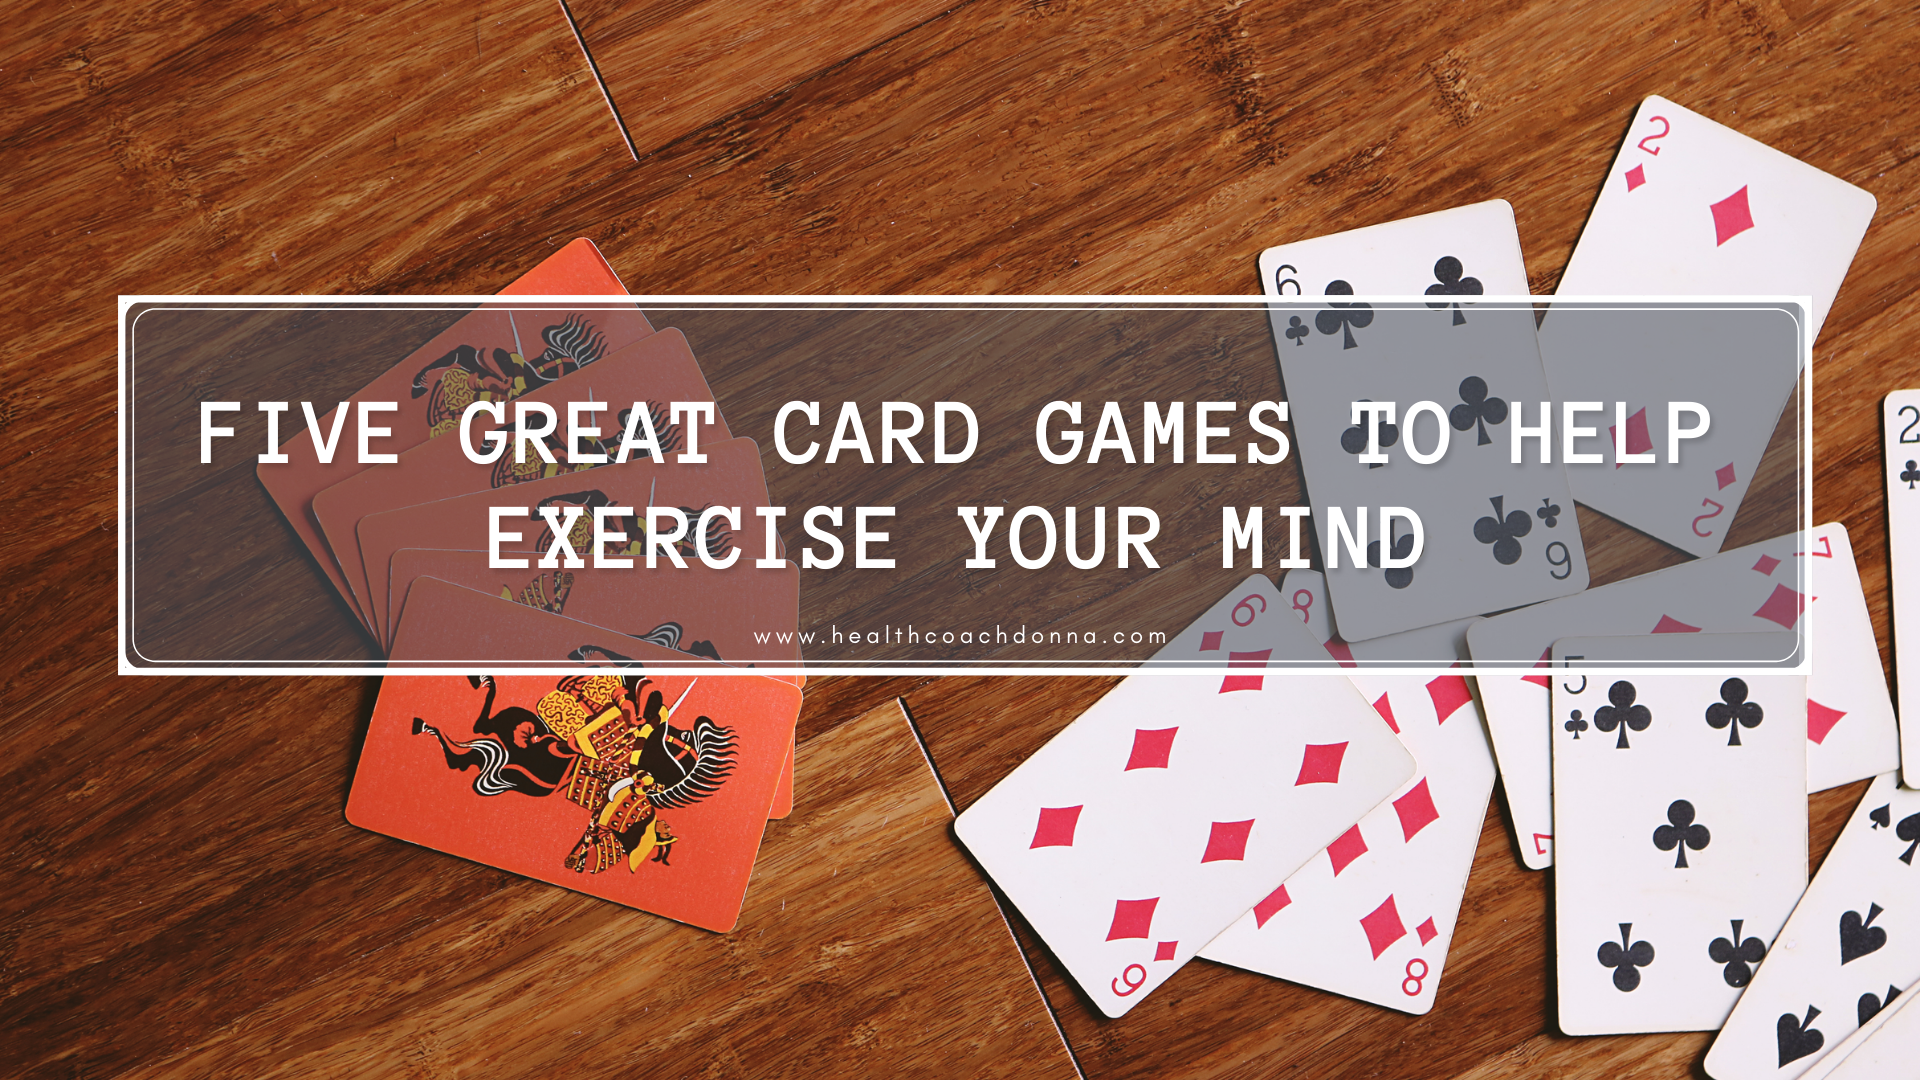 Five Great Card Games to Help Exercise Your Mind